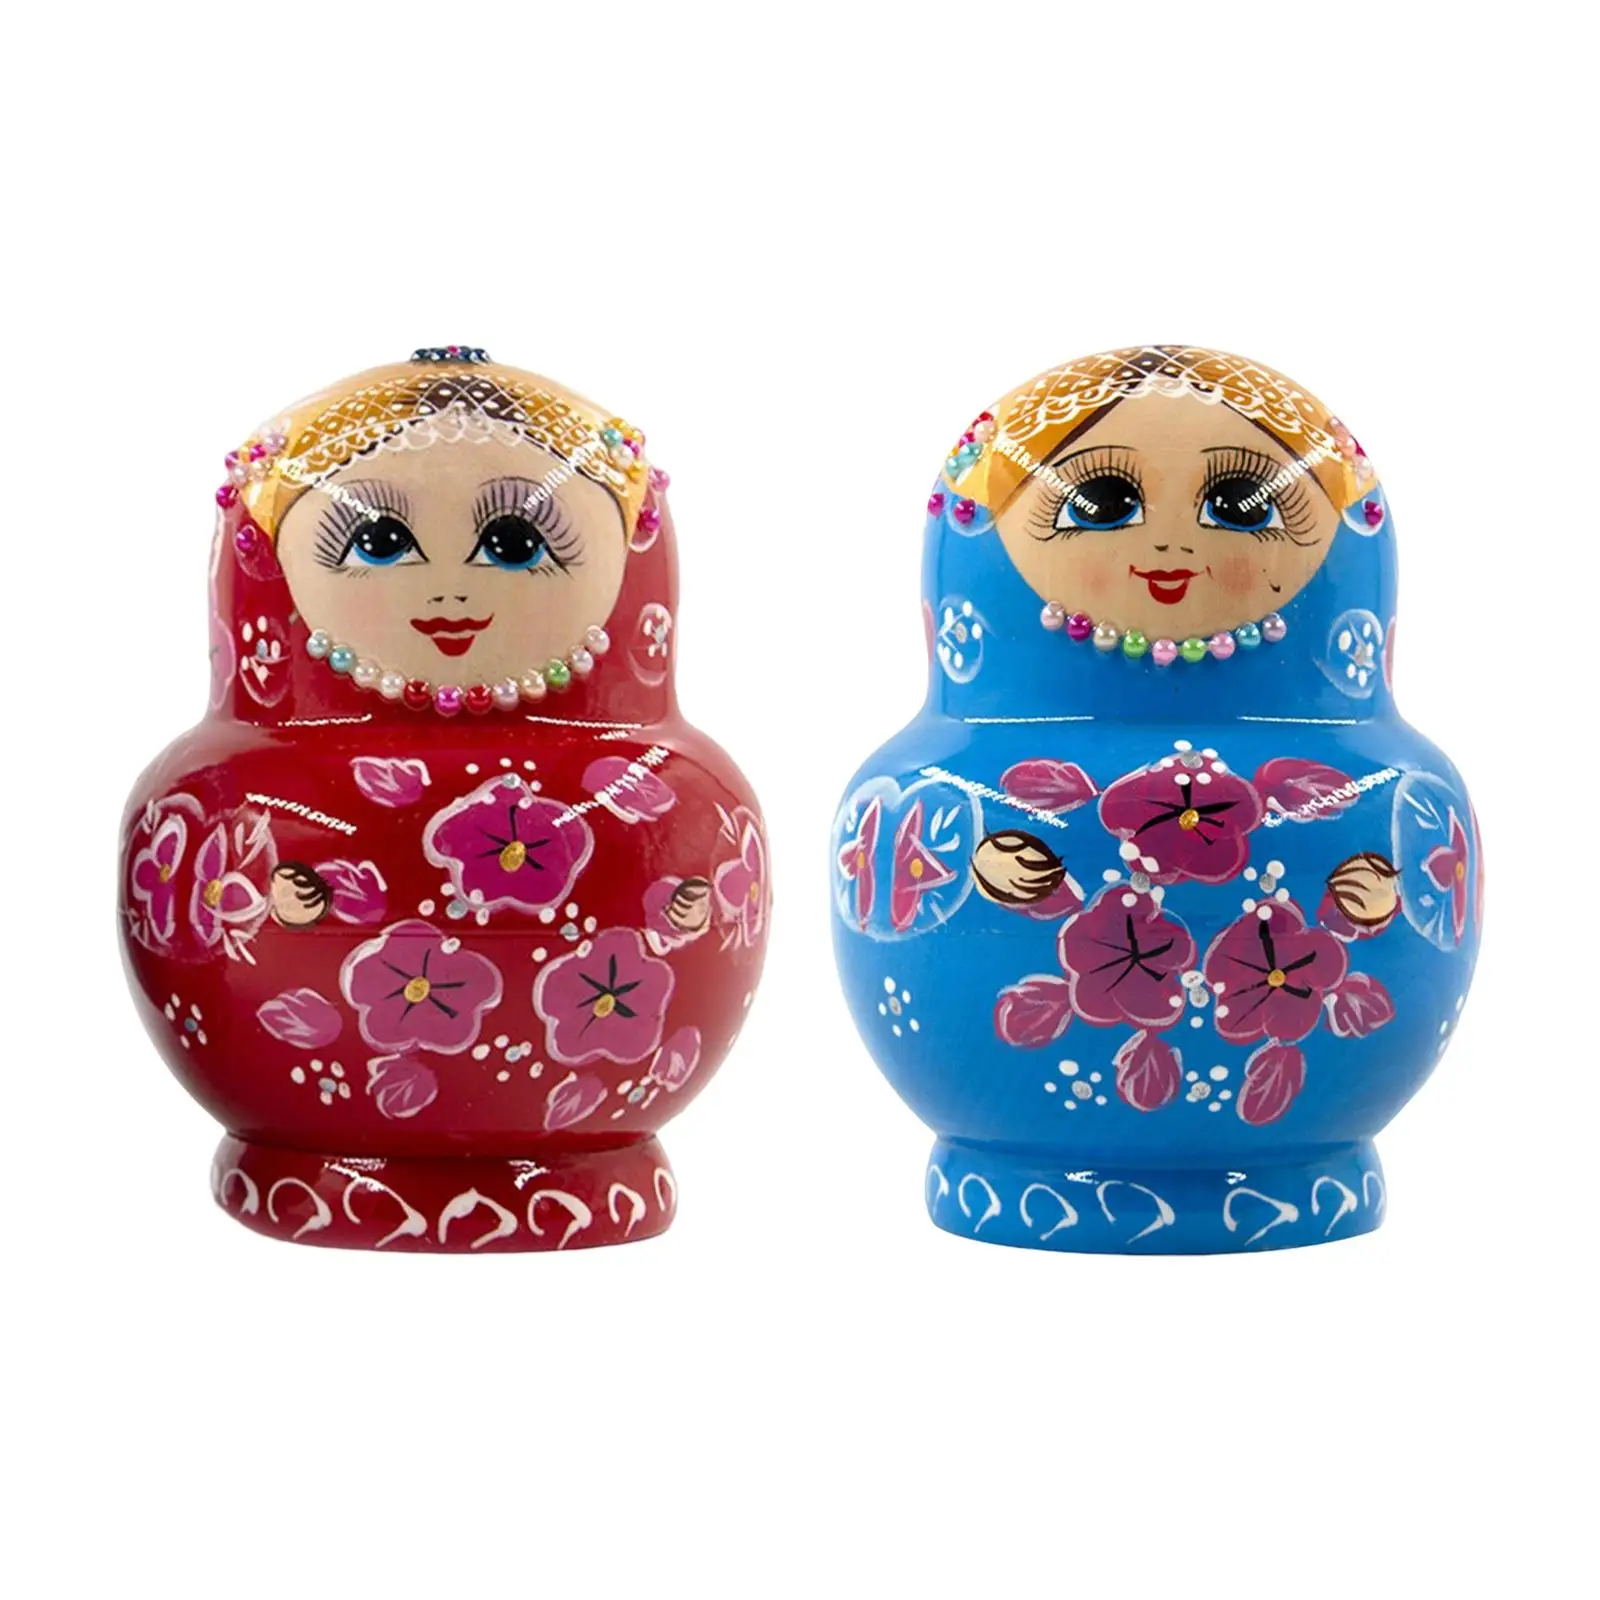 10Pcs Nesting Dolls Russian Nesting Dolls for Home Decor Holiday Gifts